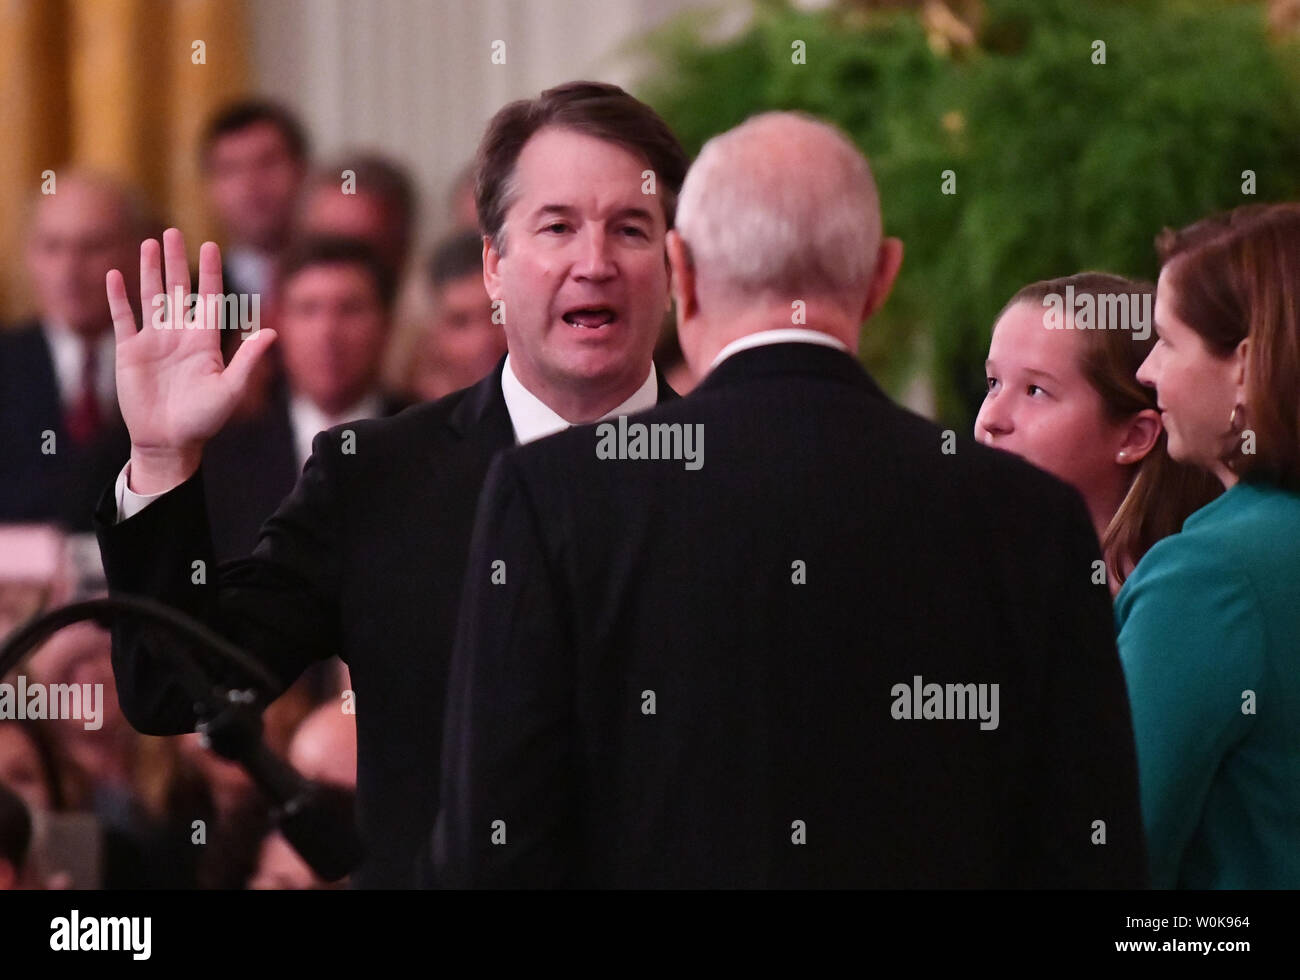 Supreme Court Associate Justice Brett Kavanaugh takes the judiciary oath, delivered by retiring Justice Anthony Kennedy, during his ceremonial swearing-in ceremony at the White House on October 8, 2018 in Washington, D.C. Kavanaugh was joined by his wife Ashley and their children Liza and Margaret. Photo by Pat Benic/UPI Stock Photo